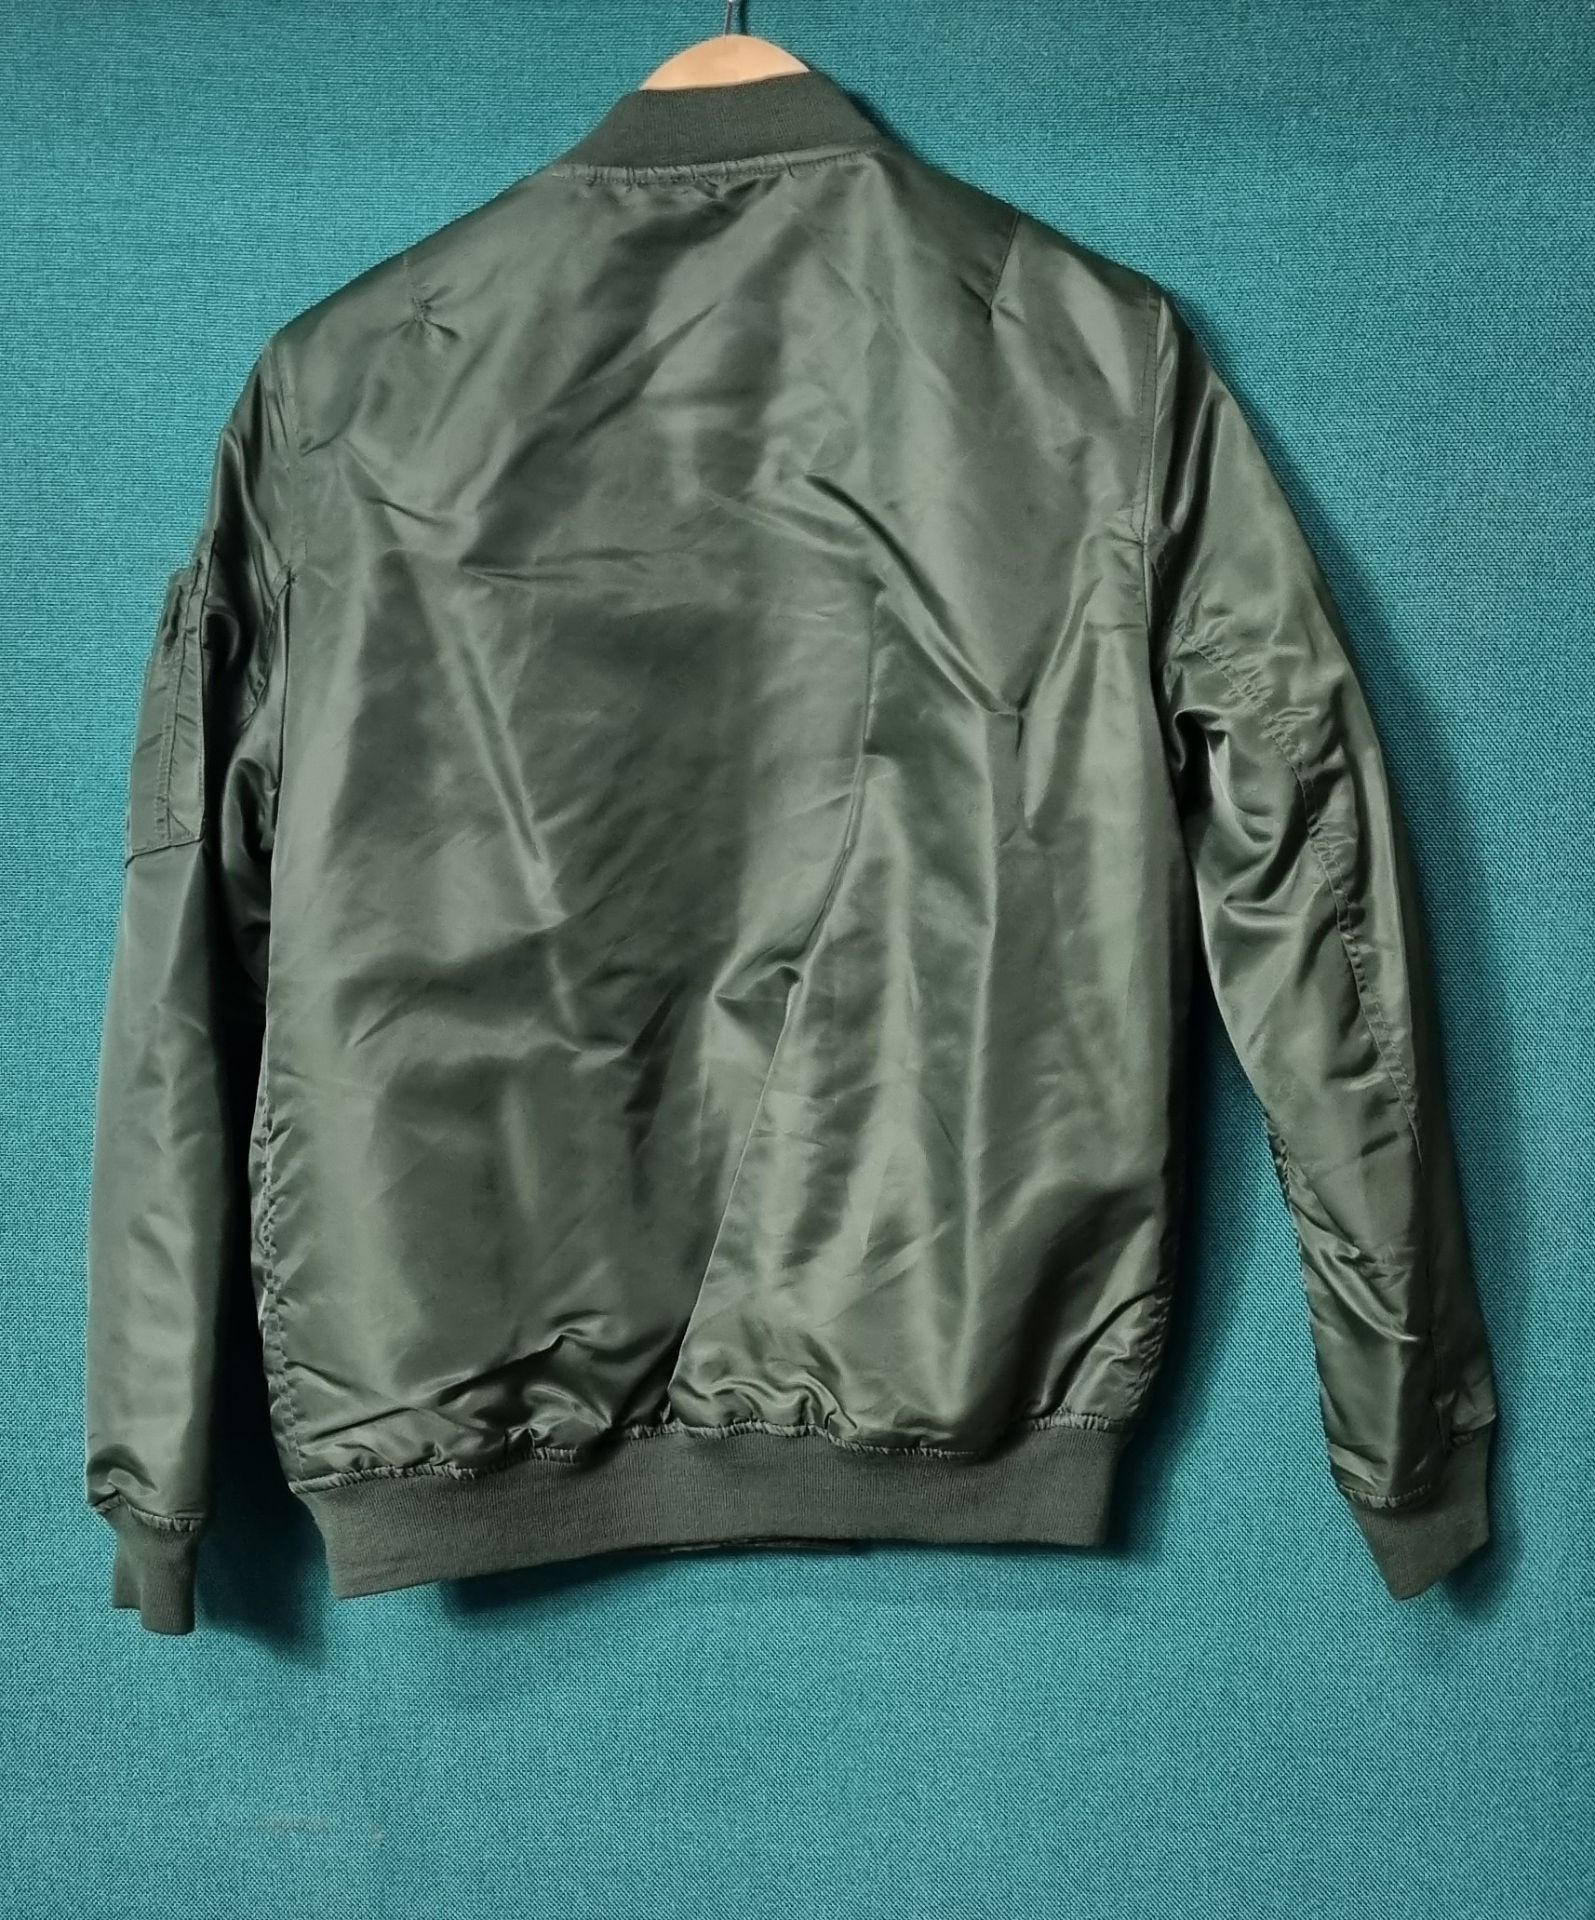 Urban DNA Green Pilots Jacket Pit To Pit 21 Inches - Image 3 of 3